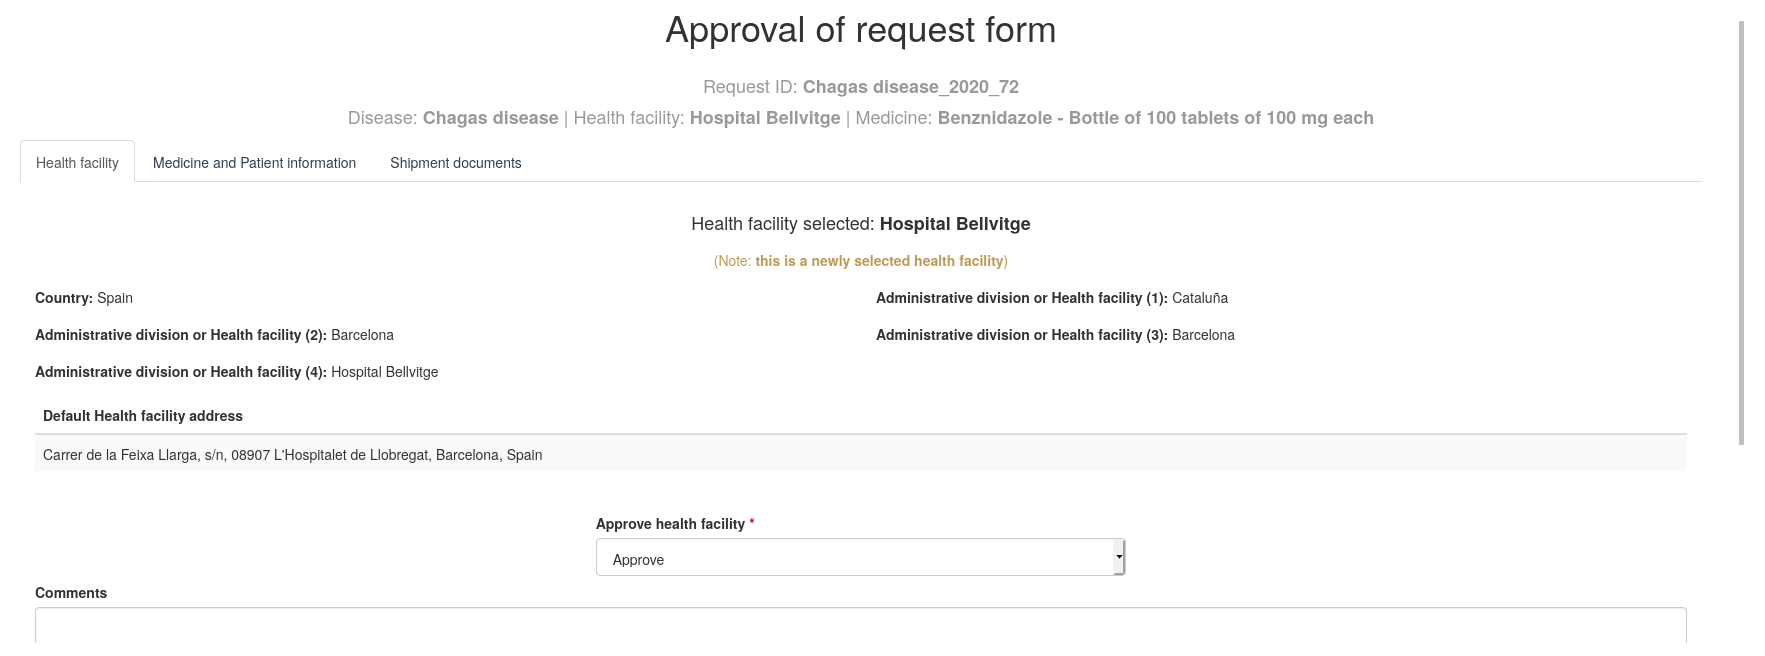 Request approval form